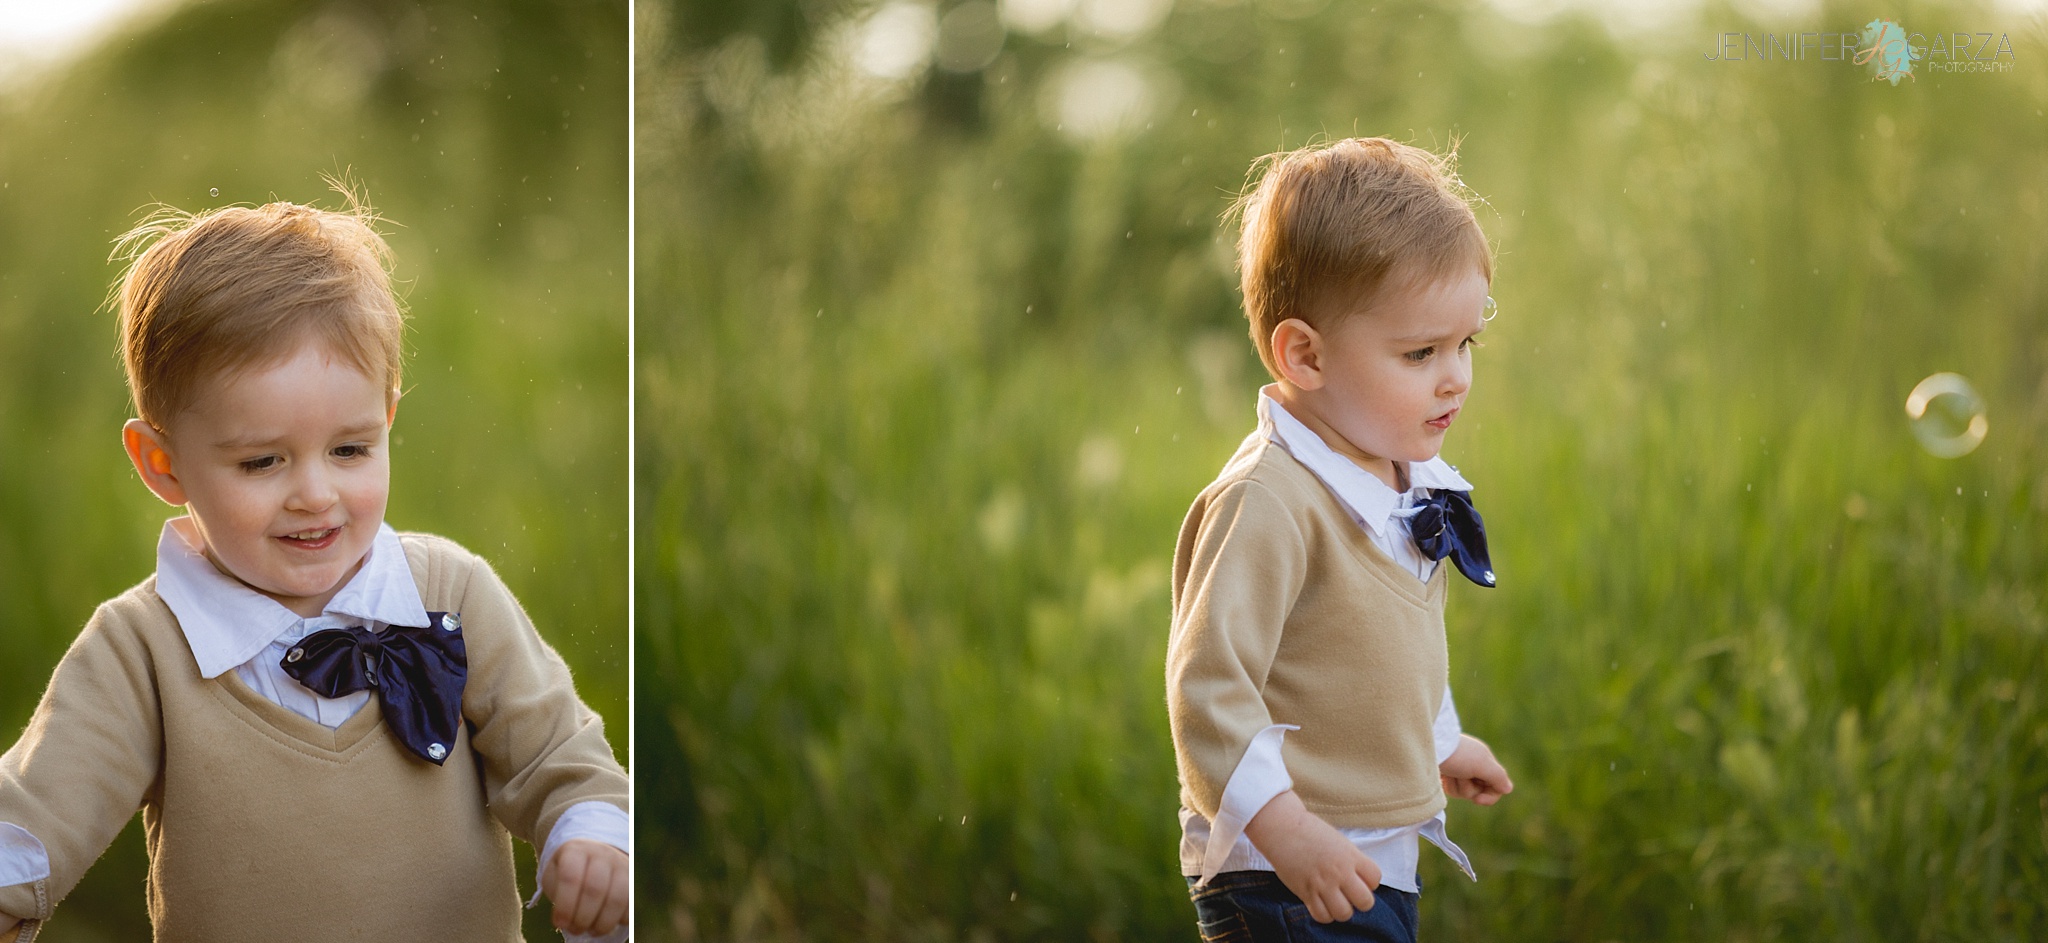 Playing in the grass during The Moffitt Family Photo Session at Golden Ponds Nature Area.